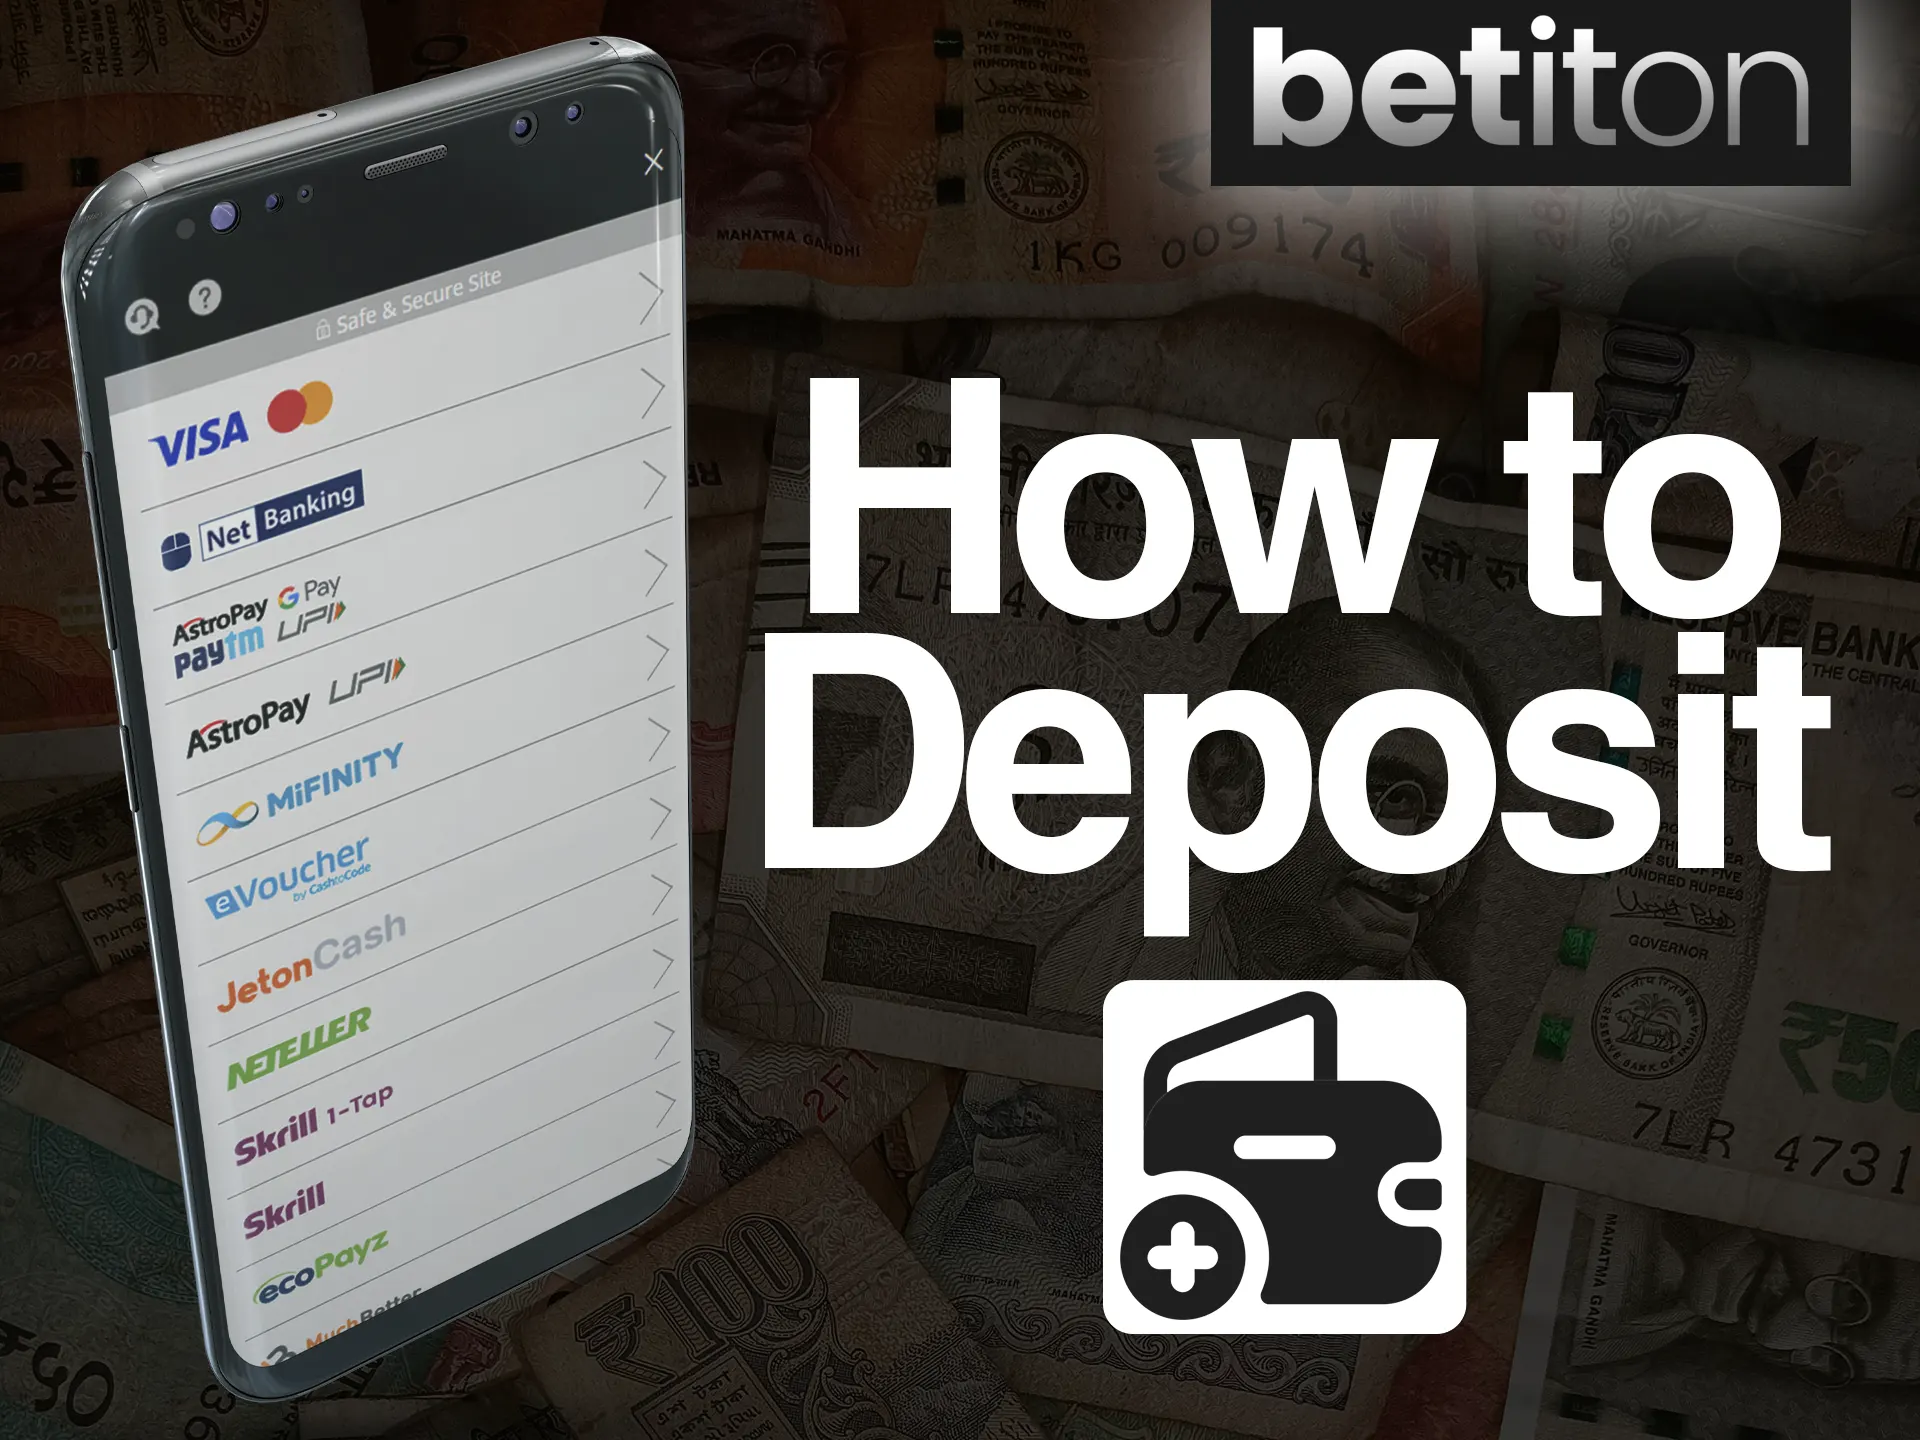 Deposit at Betiton using your favorite payment systems.